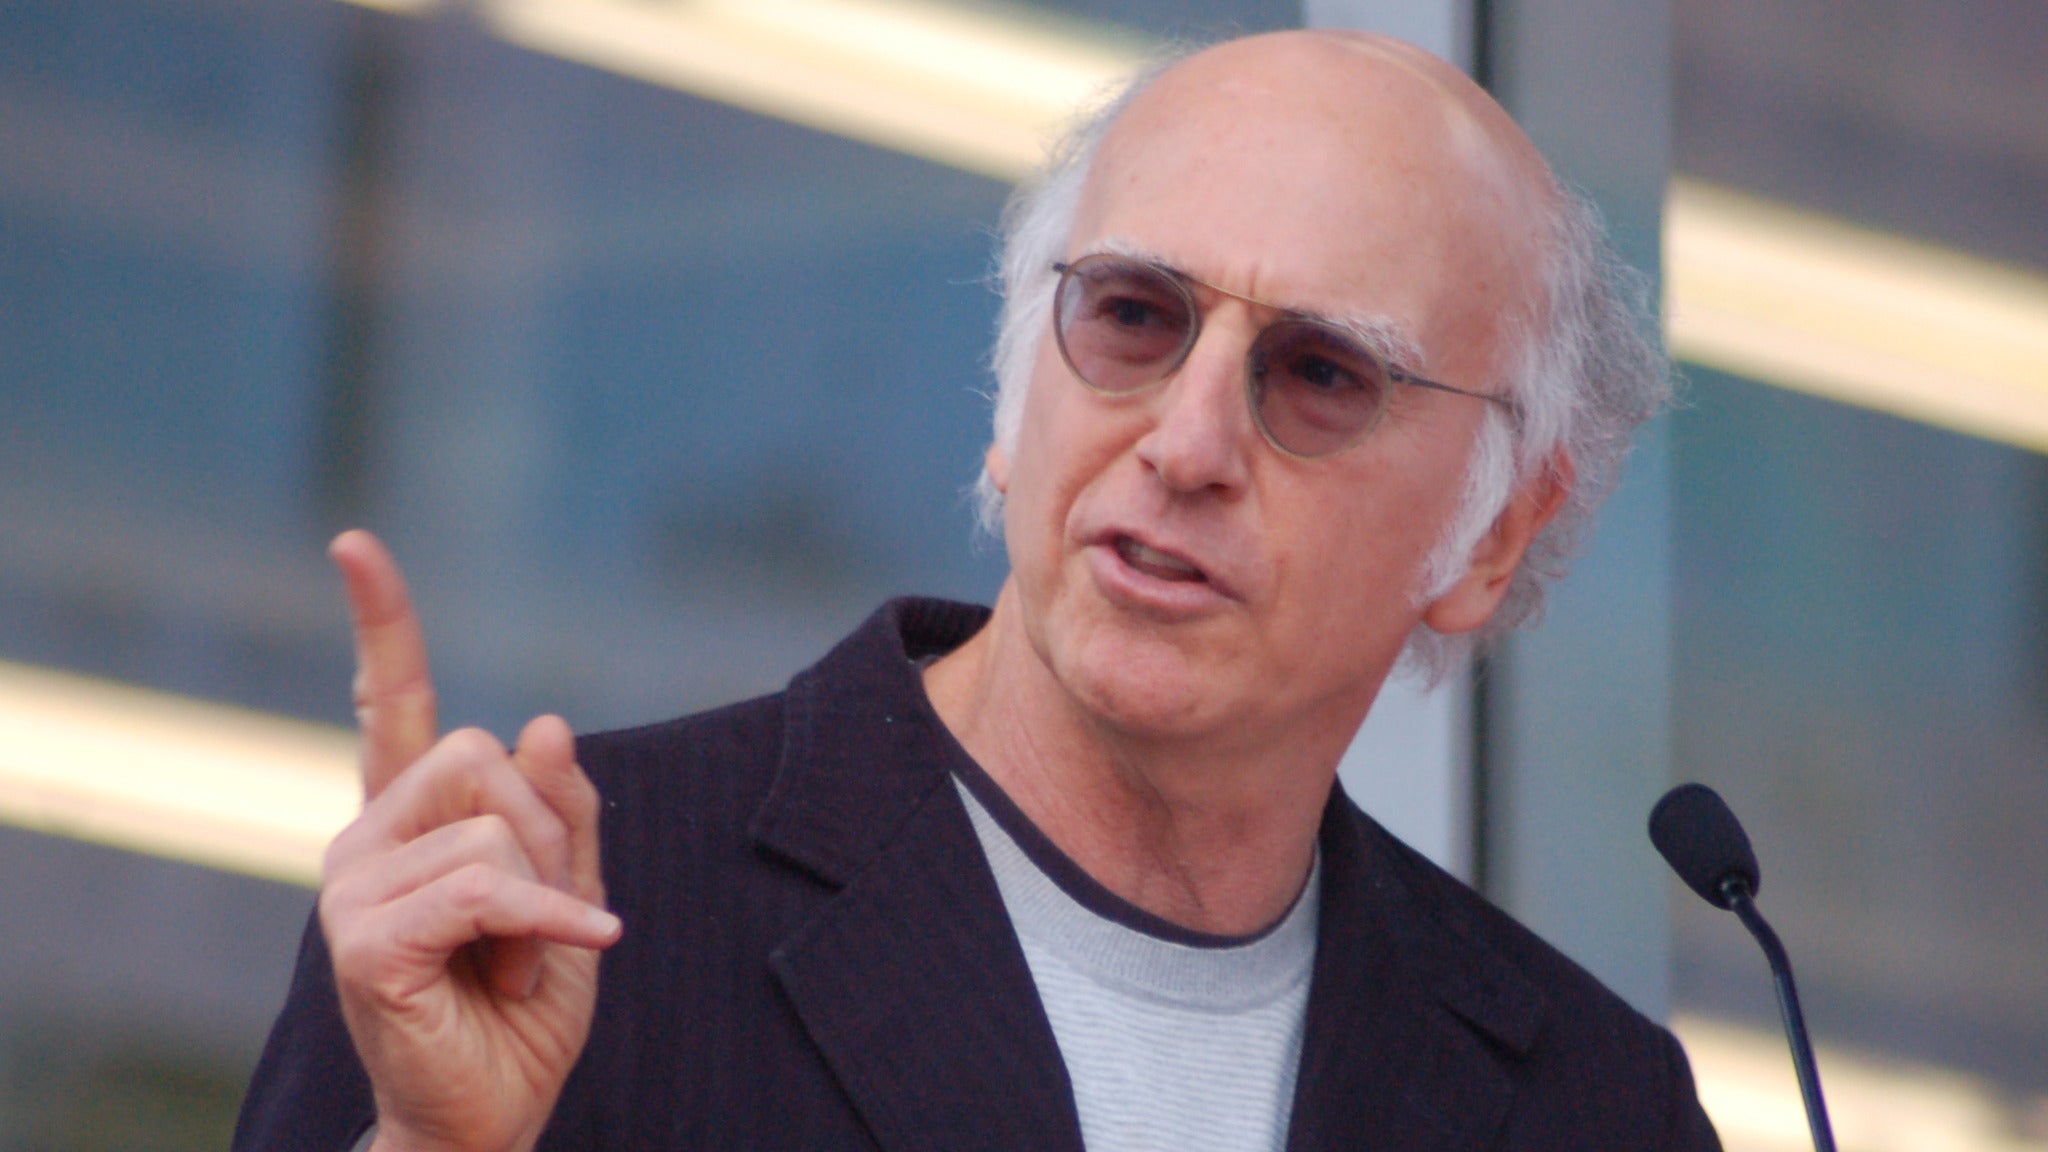 Netflix Is A Joke Presents: Larry David In Conversation in Los Angeles promo photo for Ticketmaster presale offer code